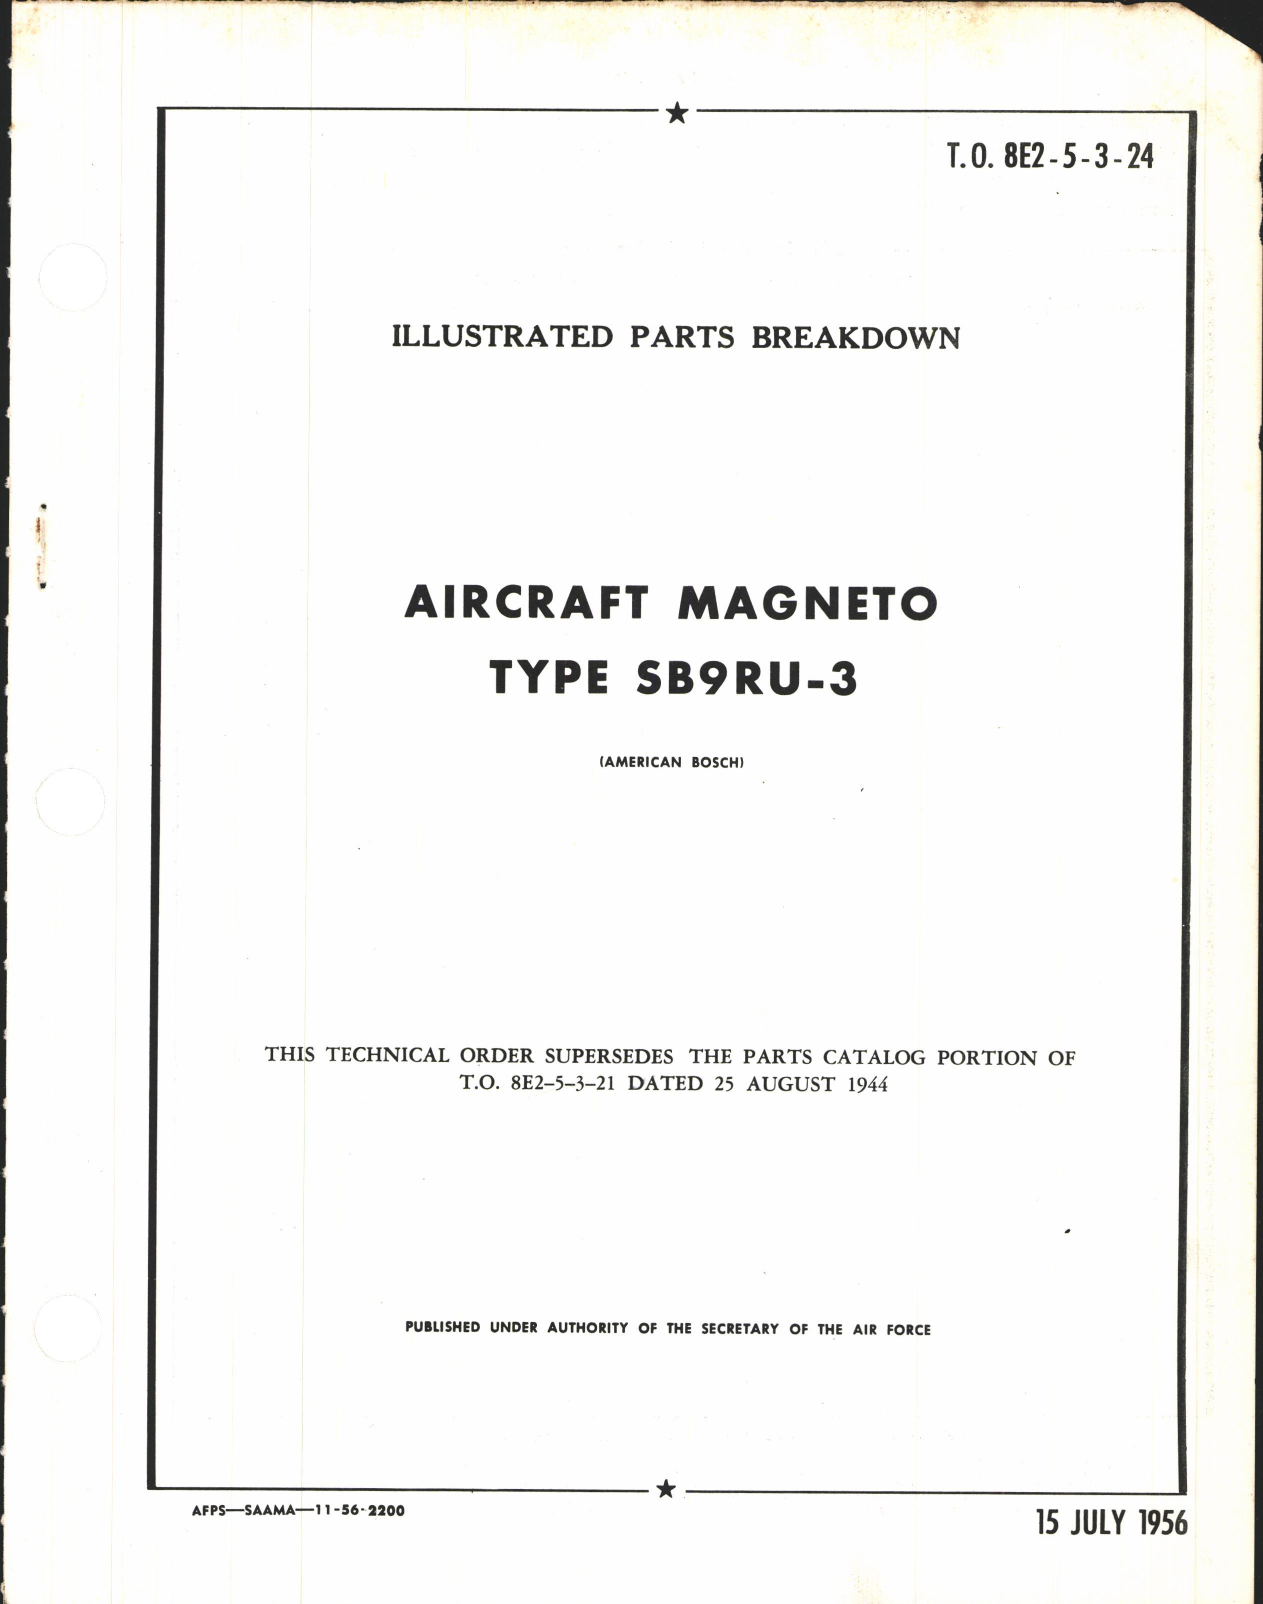 Sample page 1 from AirCorps Library document: Illustrated Parts Breakdown for Aircraft Magneto Type SB9RU-3